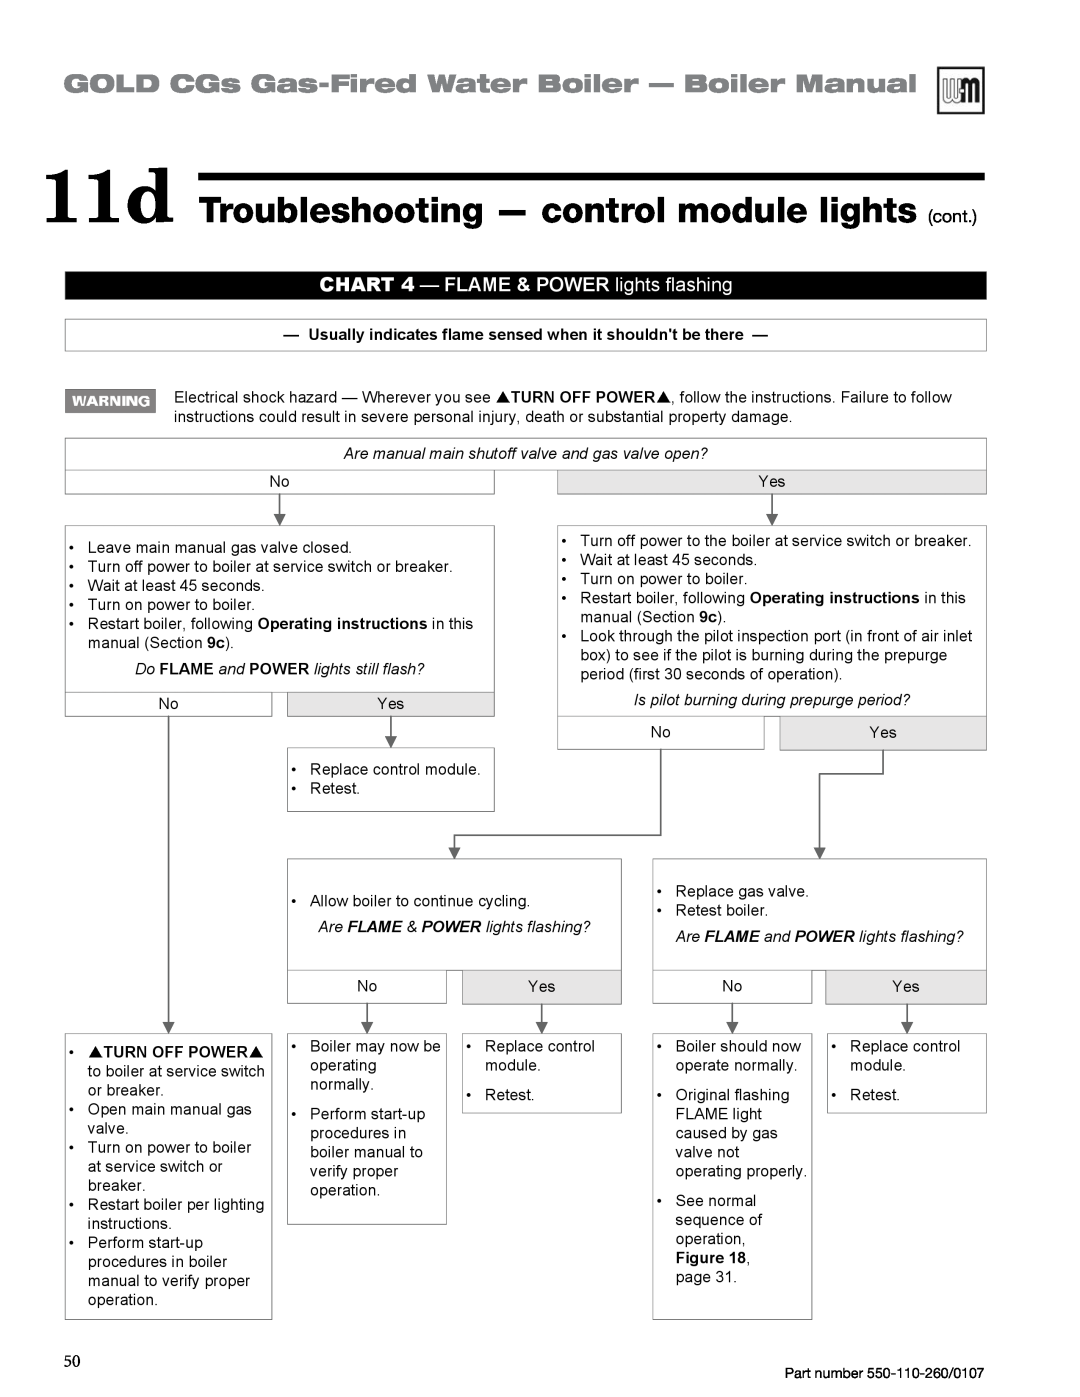 Weil-McLain 550-110-260/0107 11d Troubleshooting - control module lights cont, Do FLAME and POWER lights still flash? 